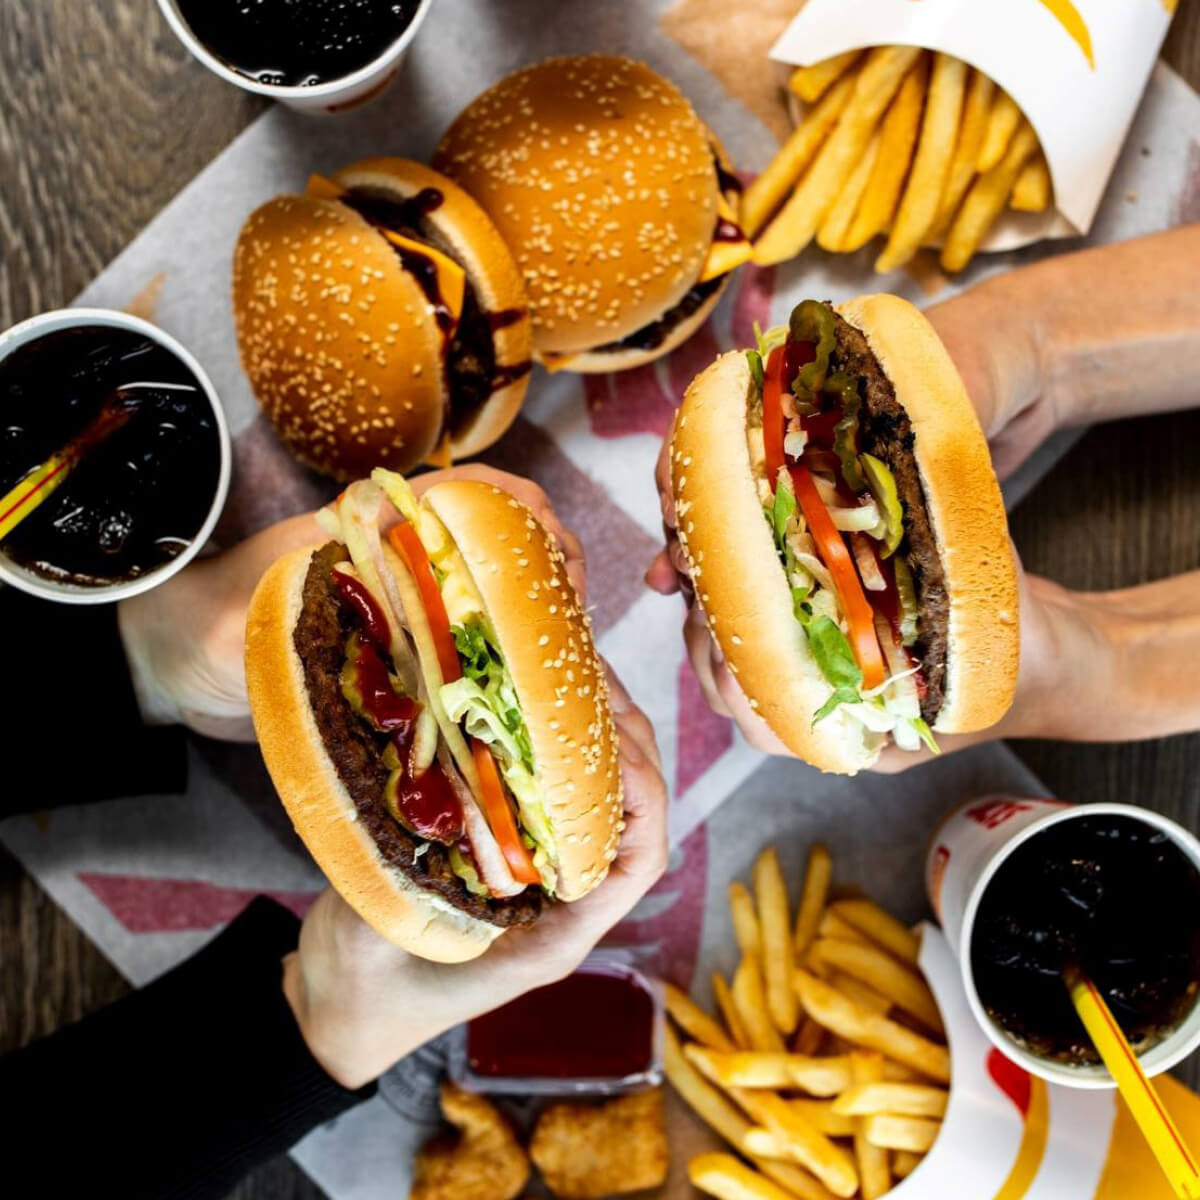 Hungry Jack's burgers and fries - treat yourself to a meal today